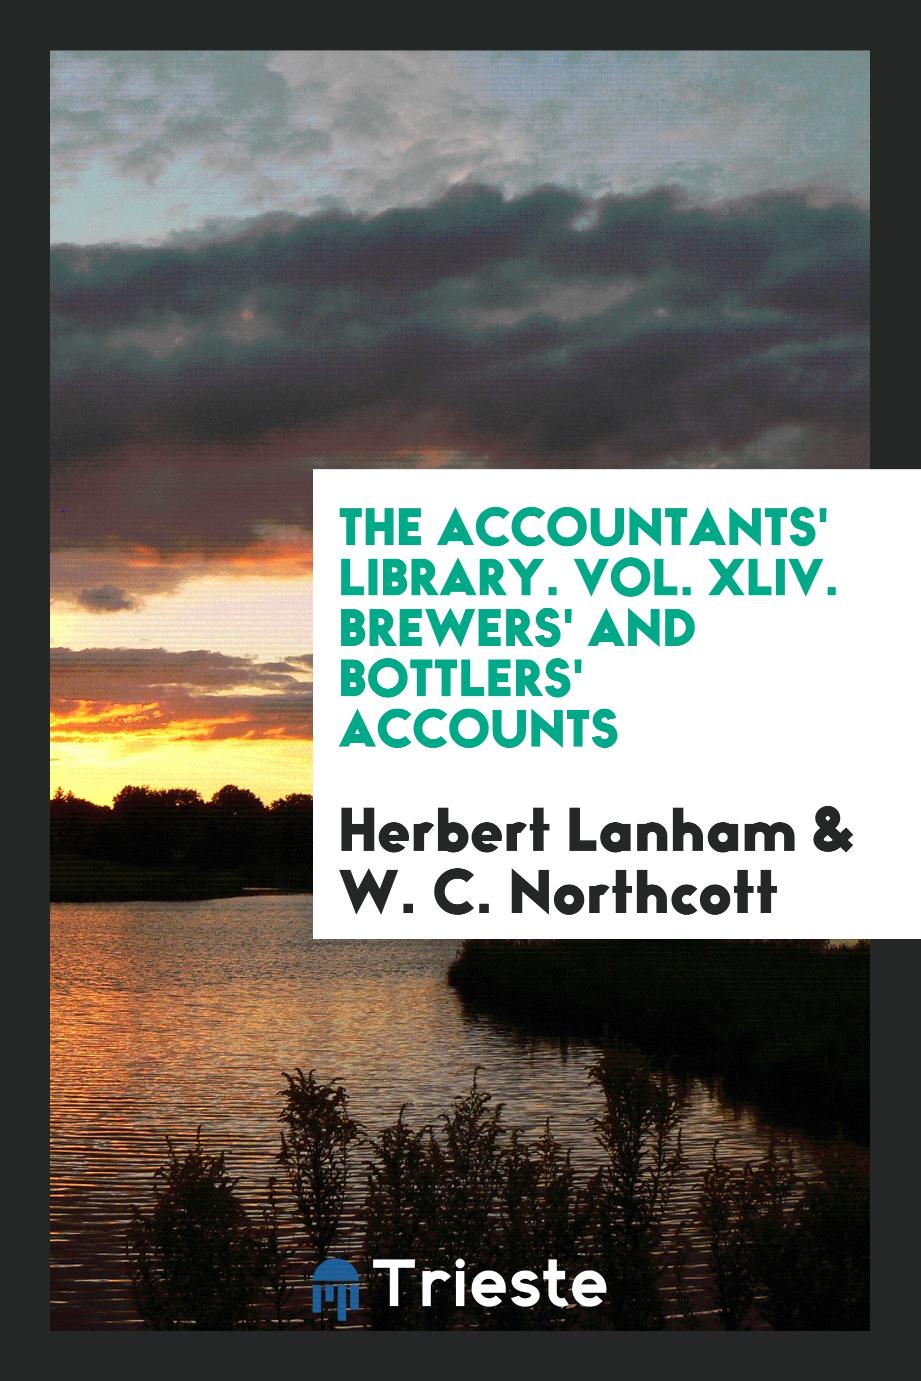 The Accountants' Library. Vol. XLIV. Brewers' and Bottlers' Accounts